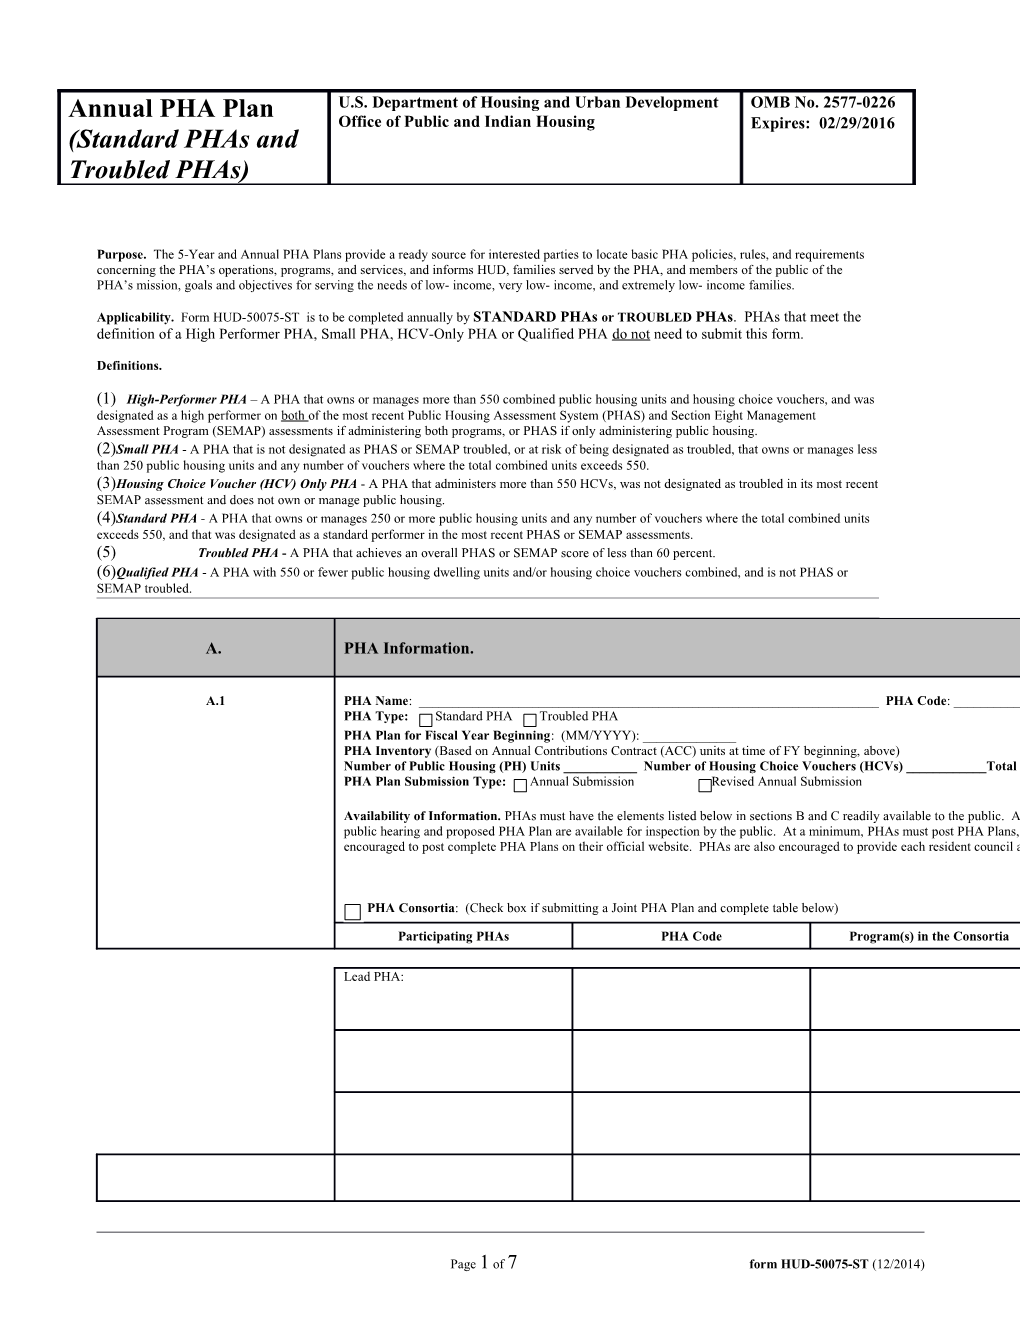 Page 1 of 6 Form HUD-50075-ST (12/2014)